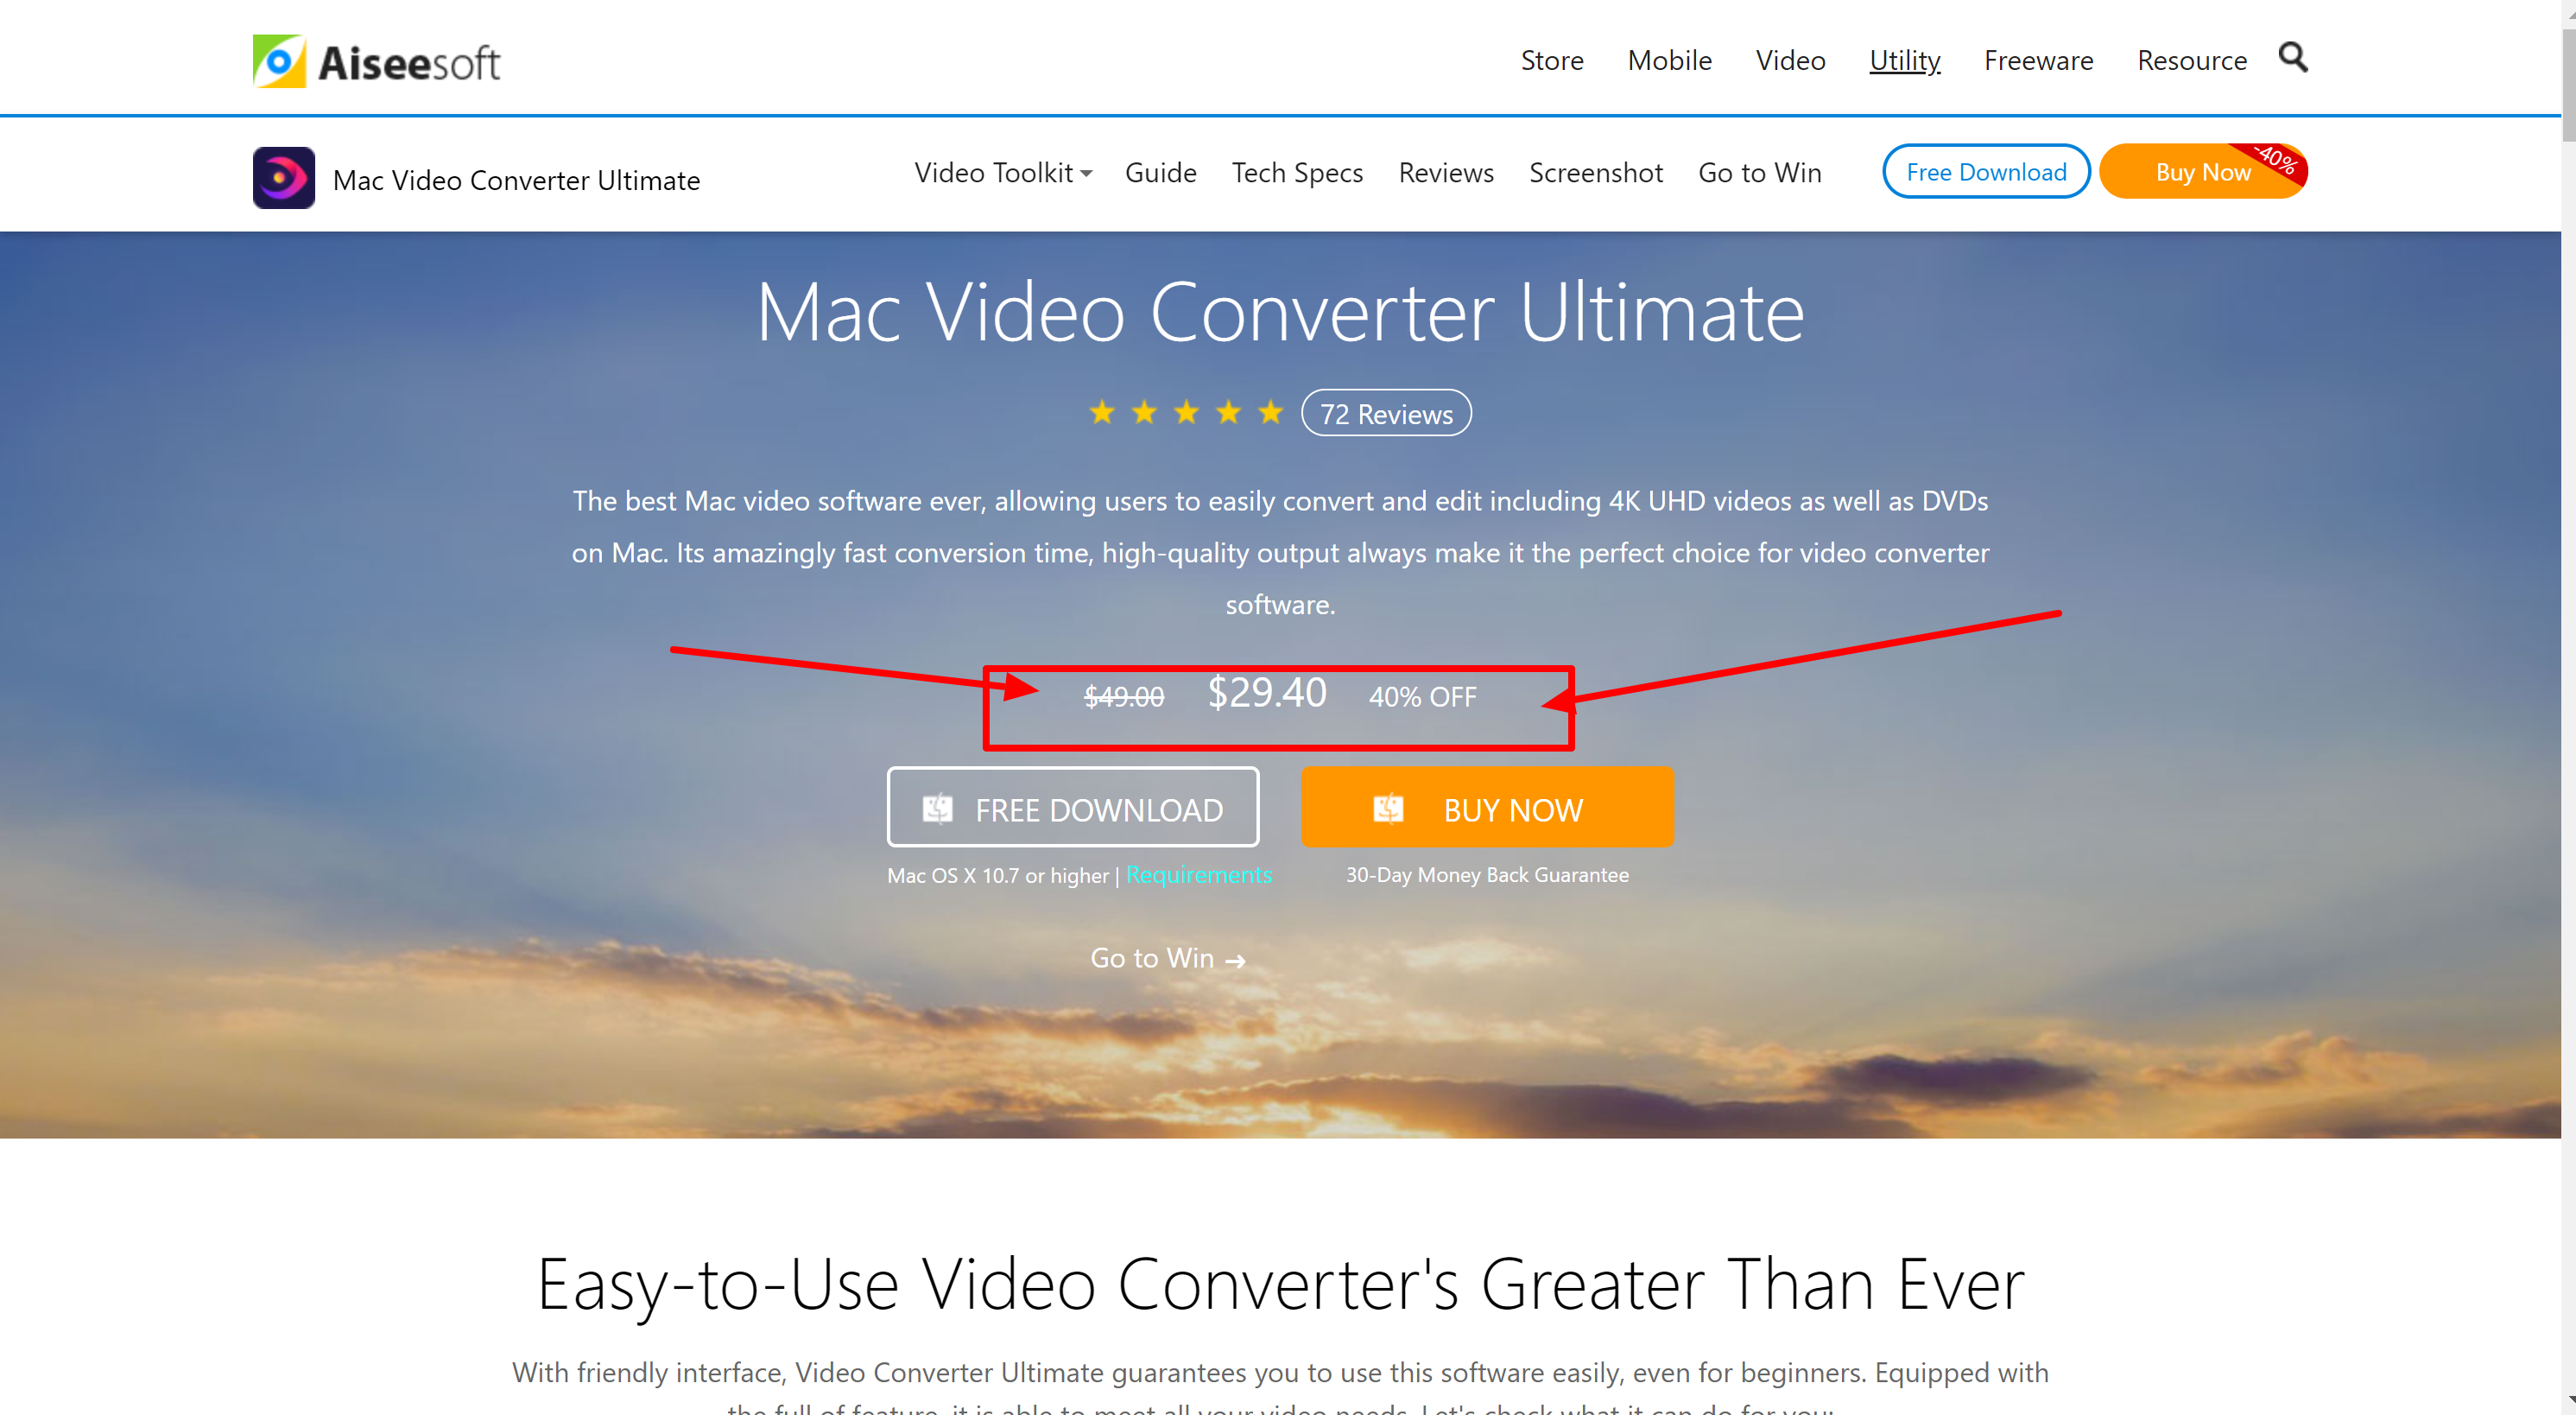 Aiseesoft Review 2022: Is It The Best Video Converter Tool